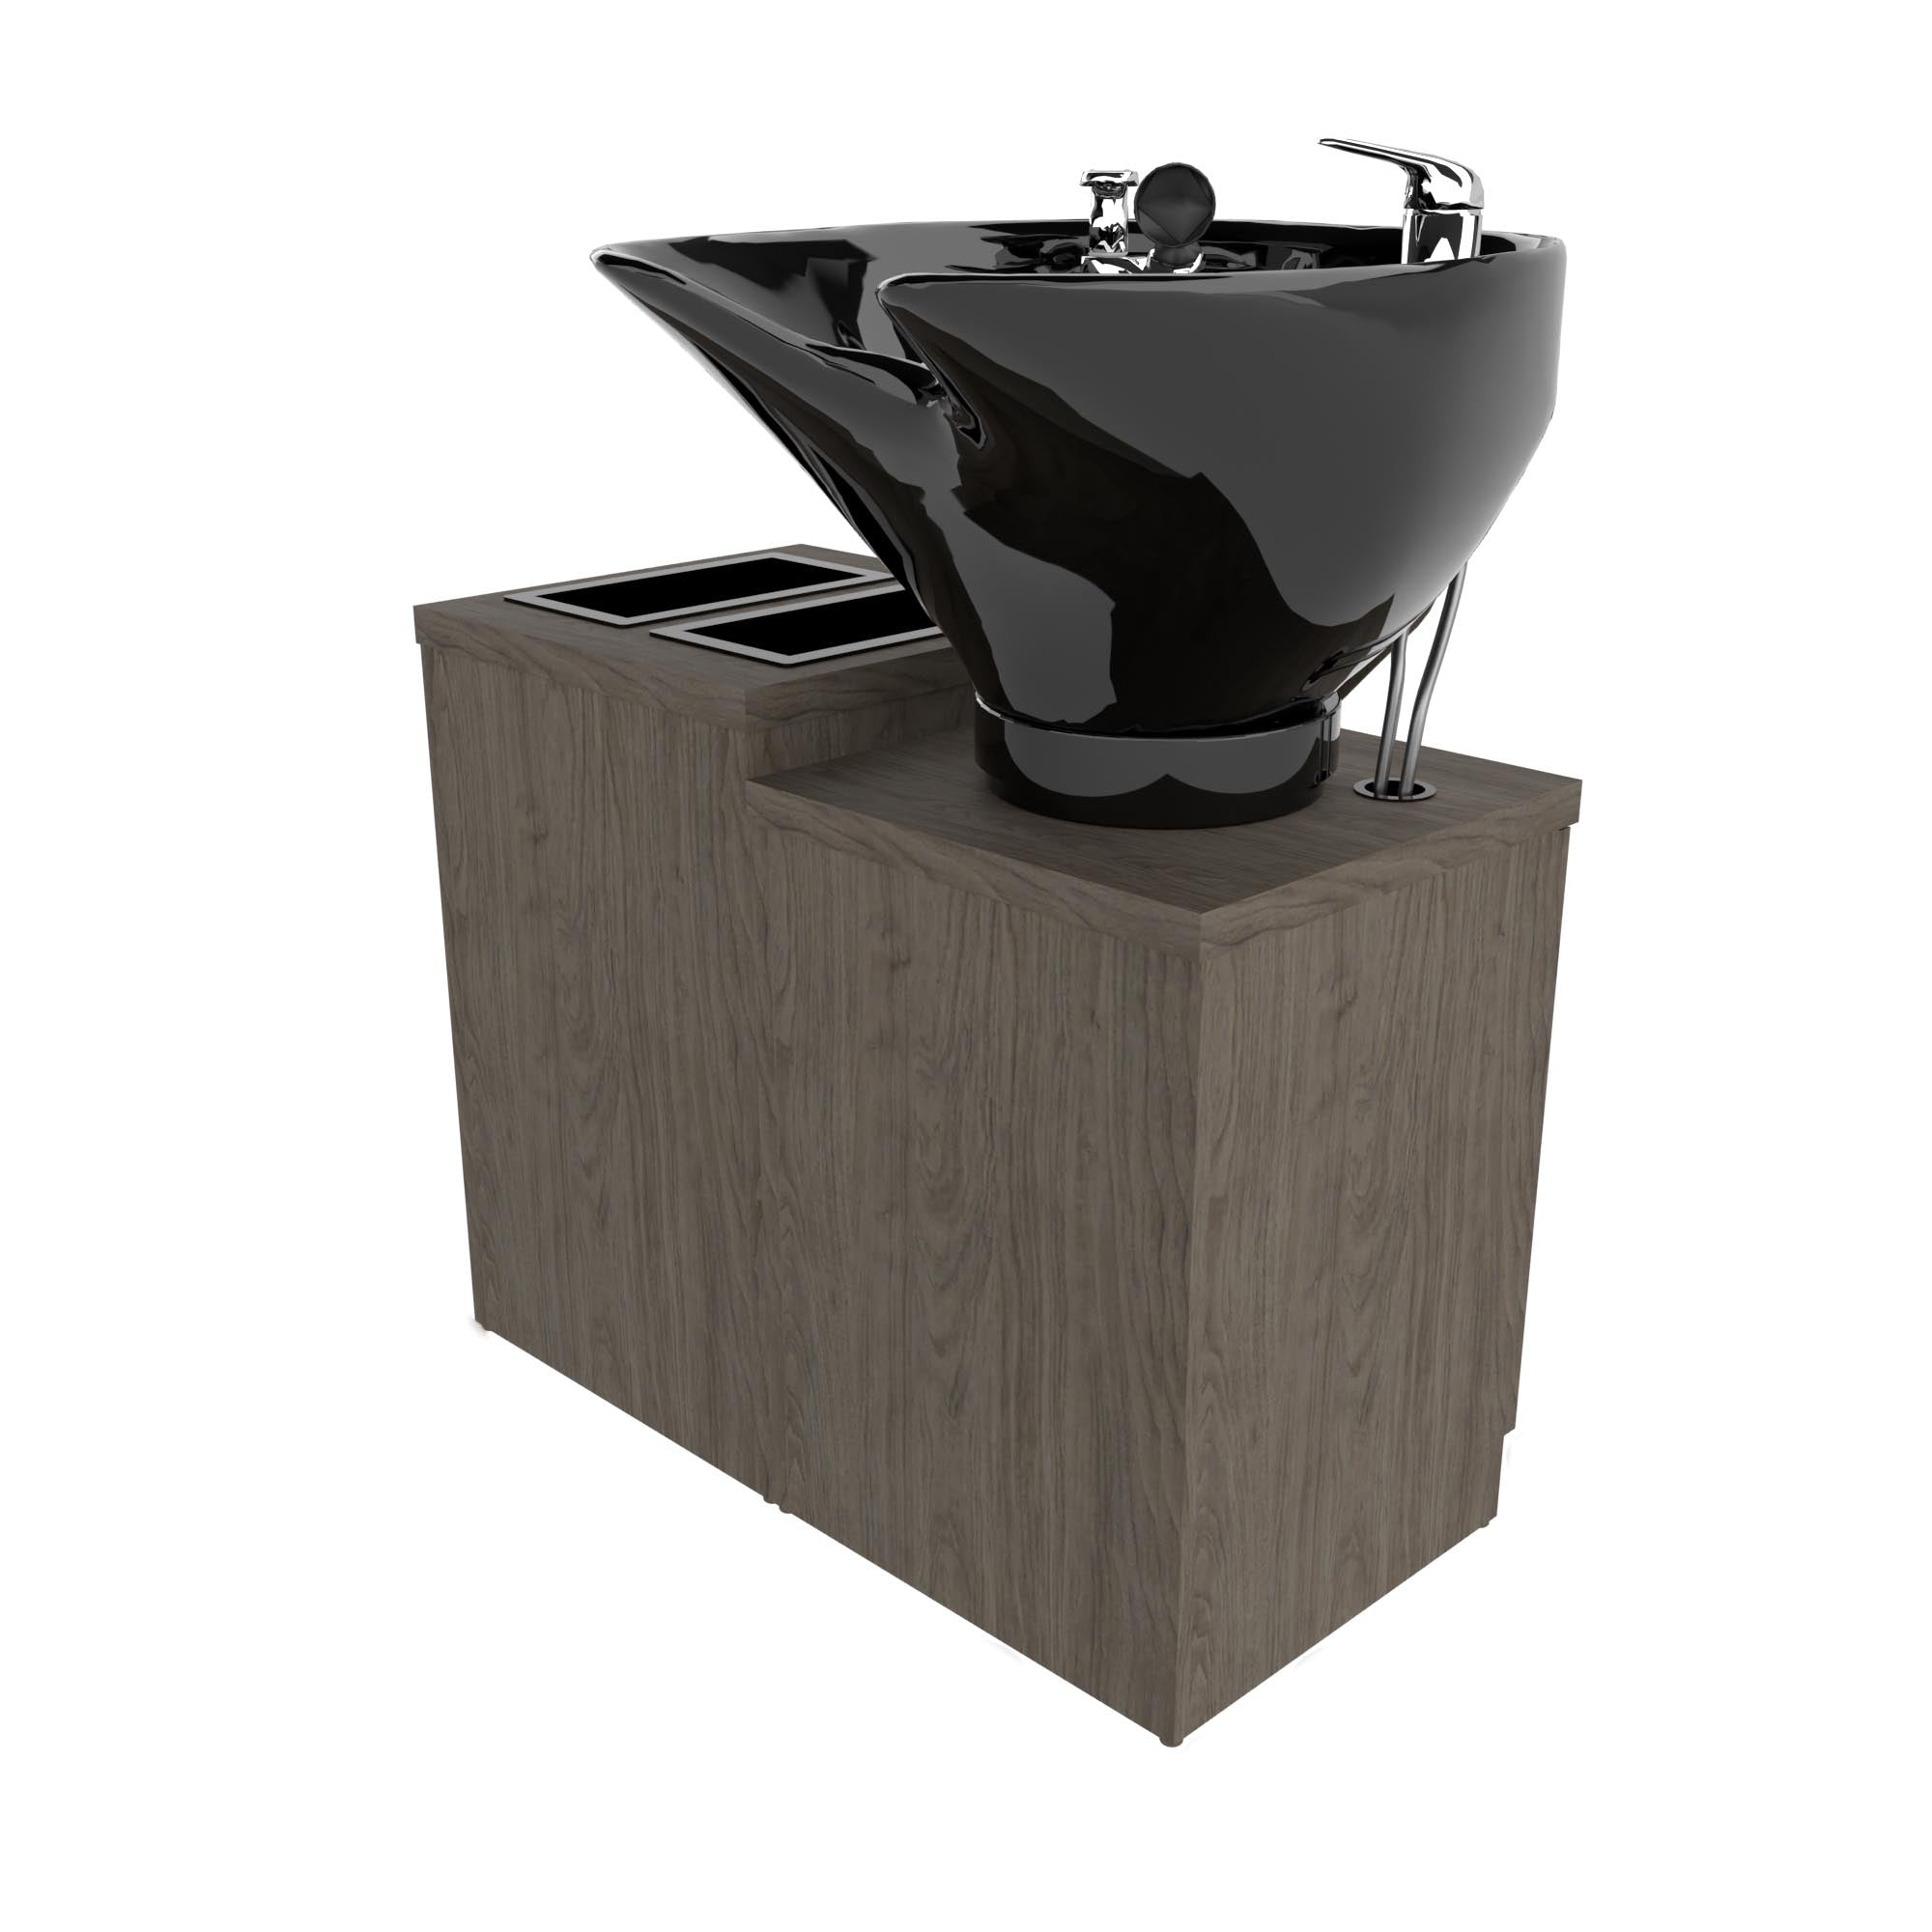 Shampoo Pedestal including Tilting Bowl with Bottle Well Storage Cabinet - Collins - Salon Equipment and Barber Equipment